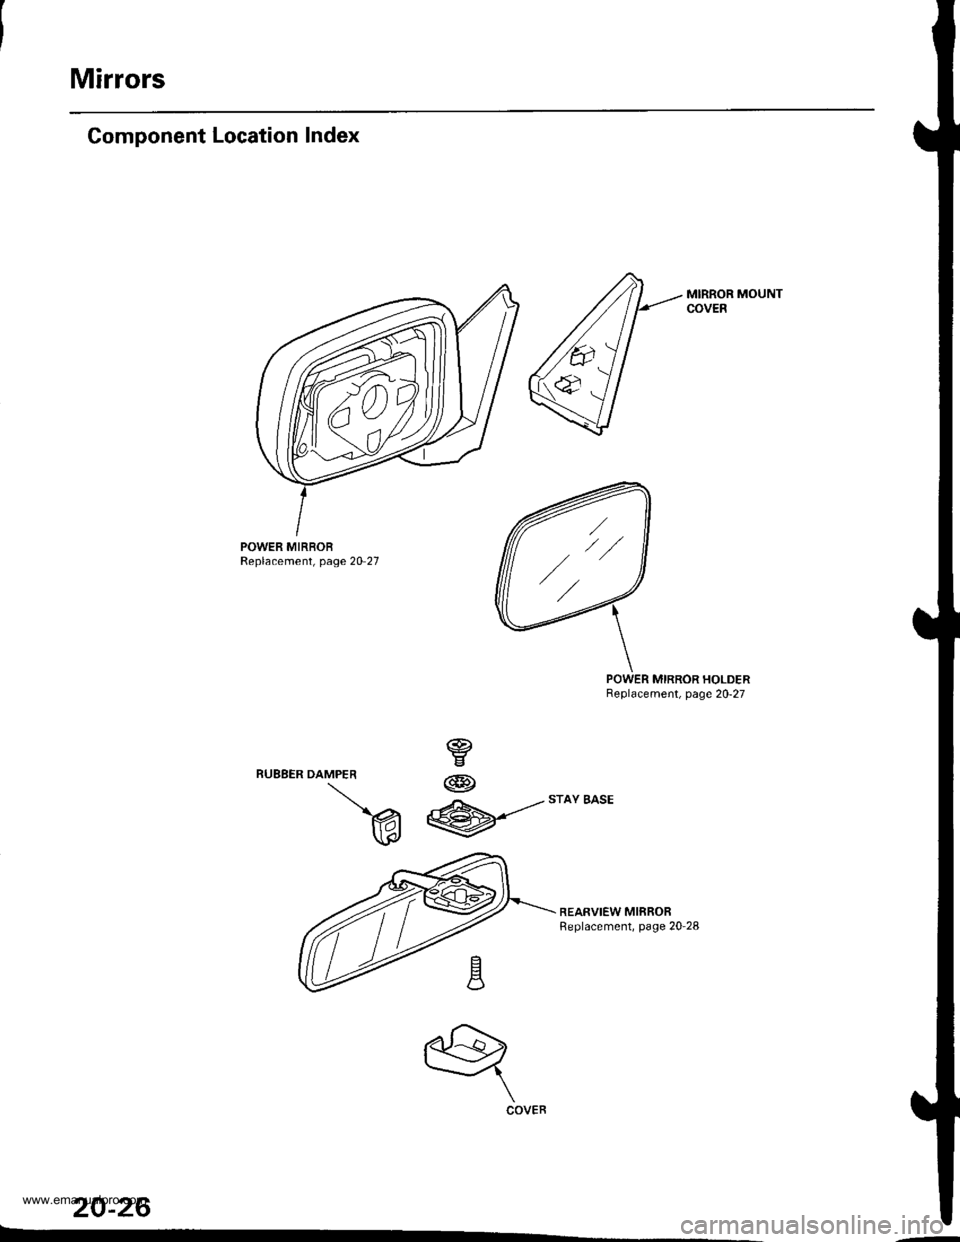 HONDA CR-V 1997 RD1-RD3 / 1.G Workshop Manual 
Mirrors
Component Location Index
MIRROR MOUNTCOVEB
POWER MIRBORReplacement, page 20 27
MIRROR HOLDERBeplacement, page 20-27
REARVIEW MIRRORReplacement, page 20-28
20-26
DAMPER
v
W
@
@
w
q
COVER
,//
w